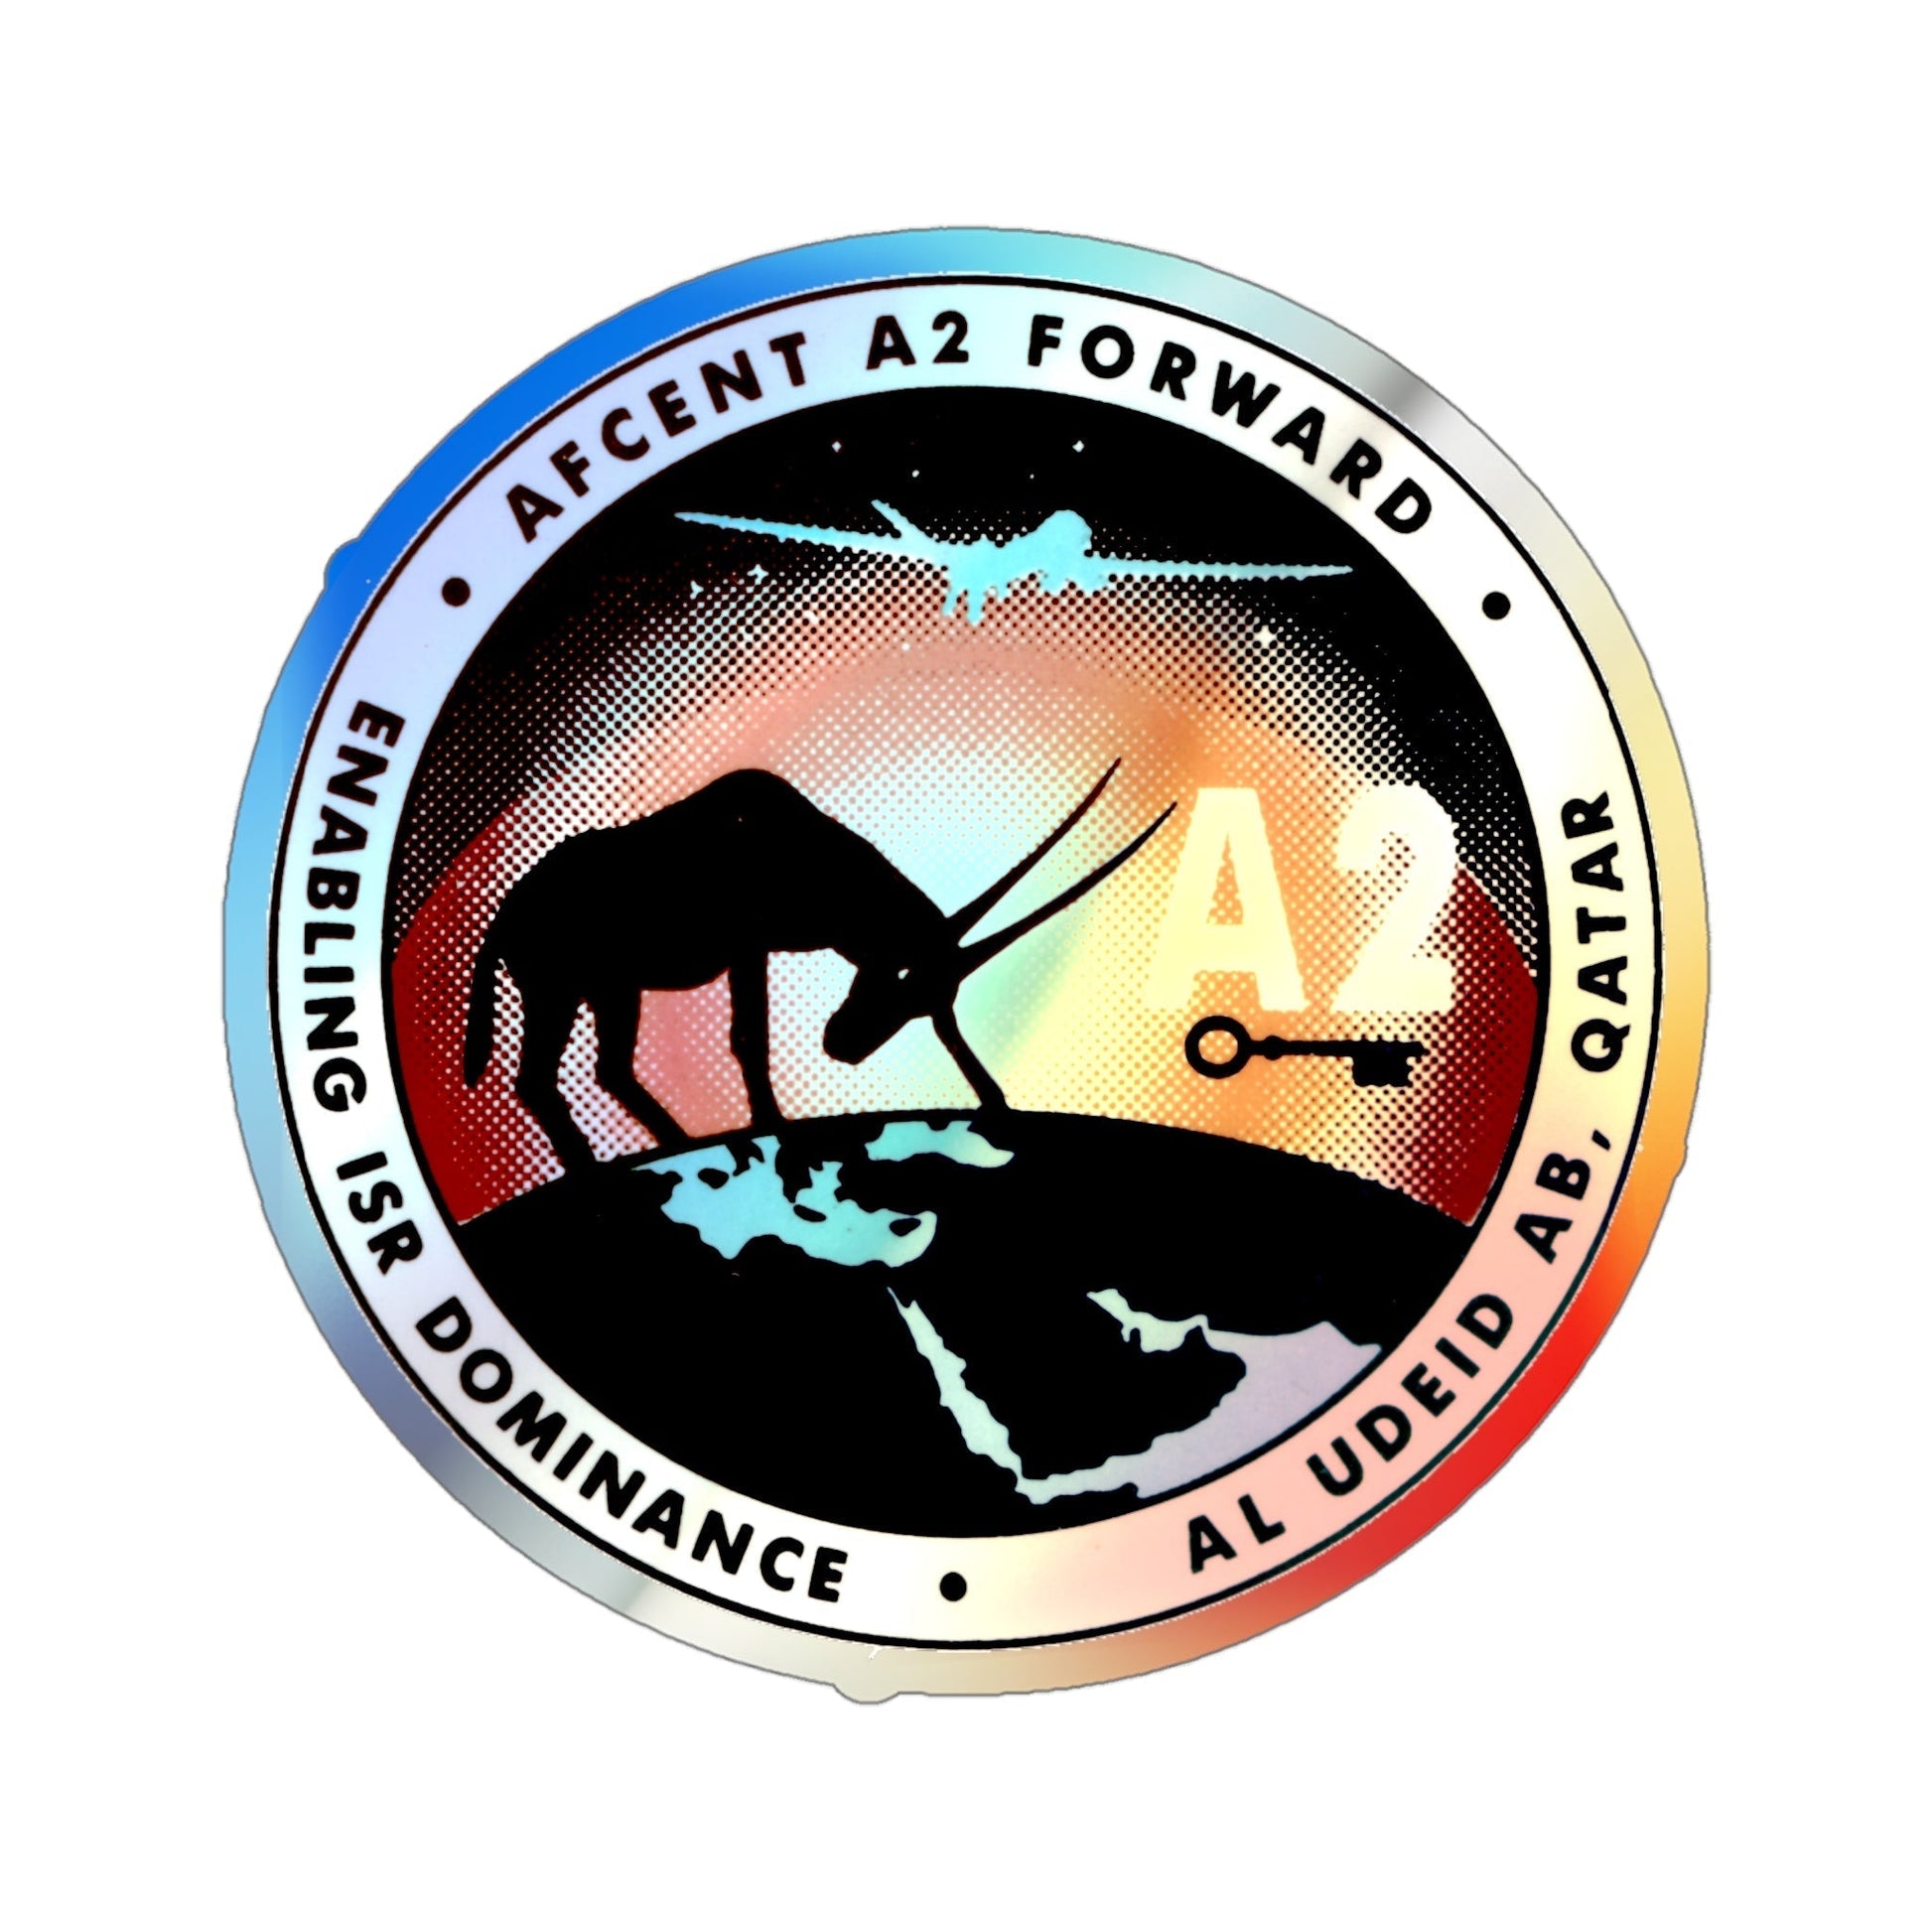 AFCENT A2 Forward (U.S. Air Force) Holographic STICKER Die-Cut Vinyl Decal-4 Inch-The Sticker Space